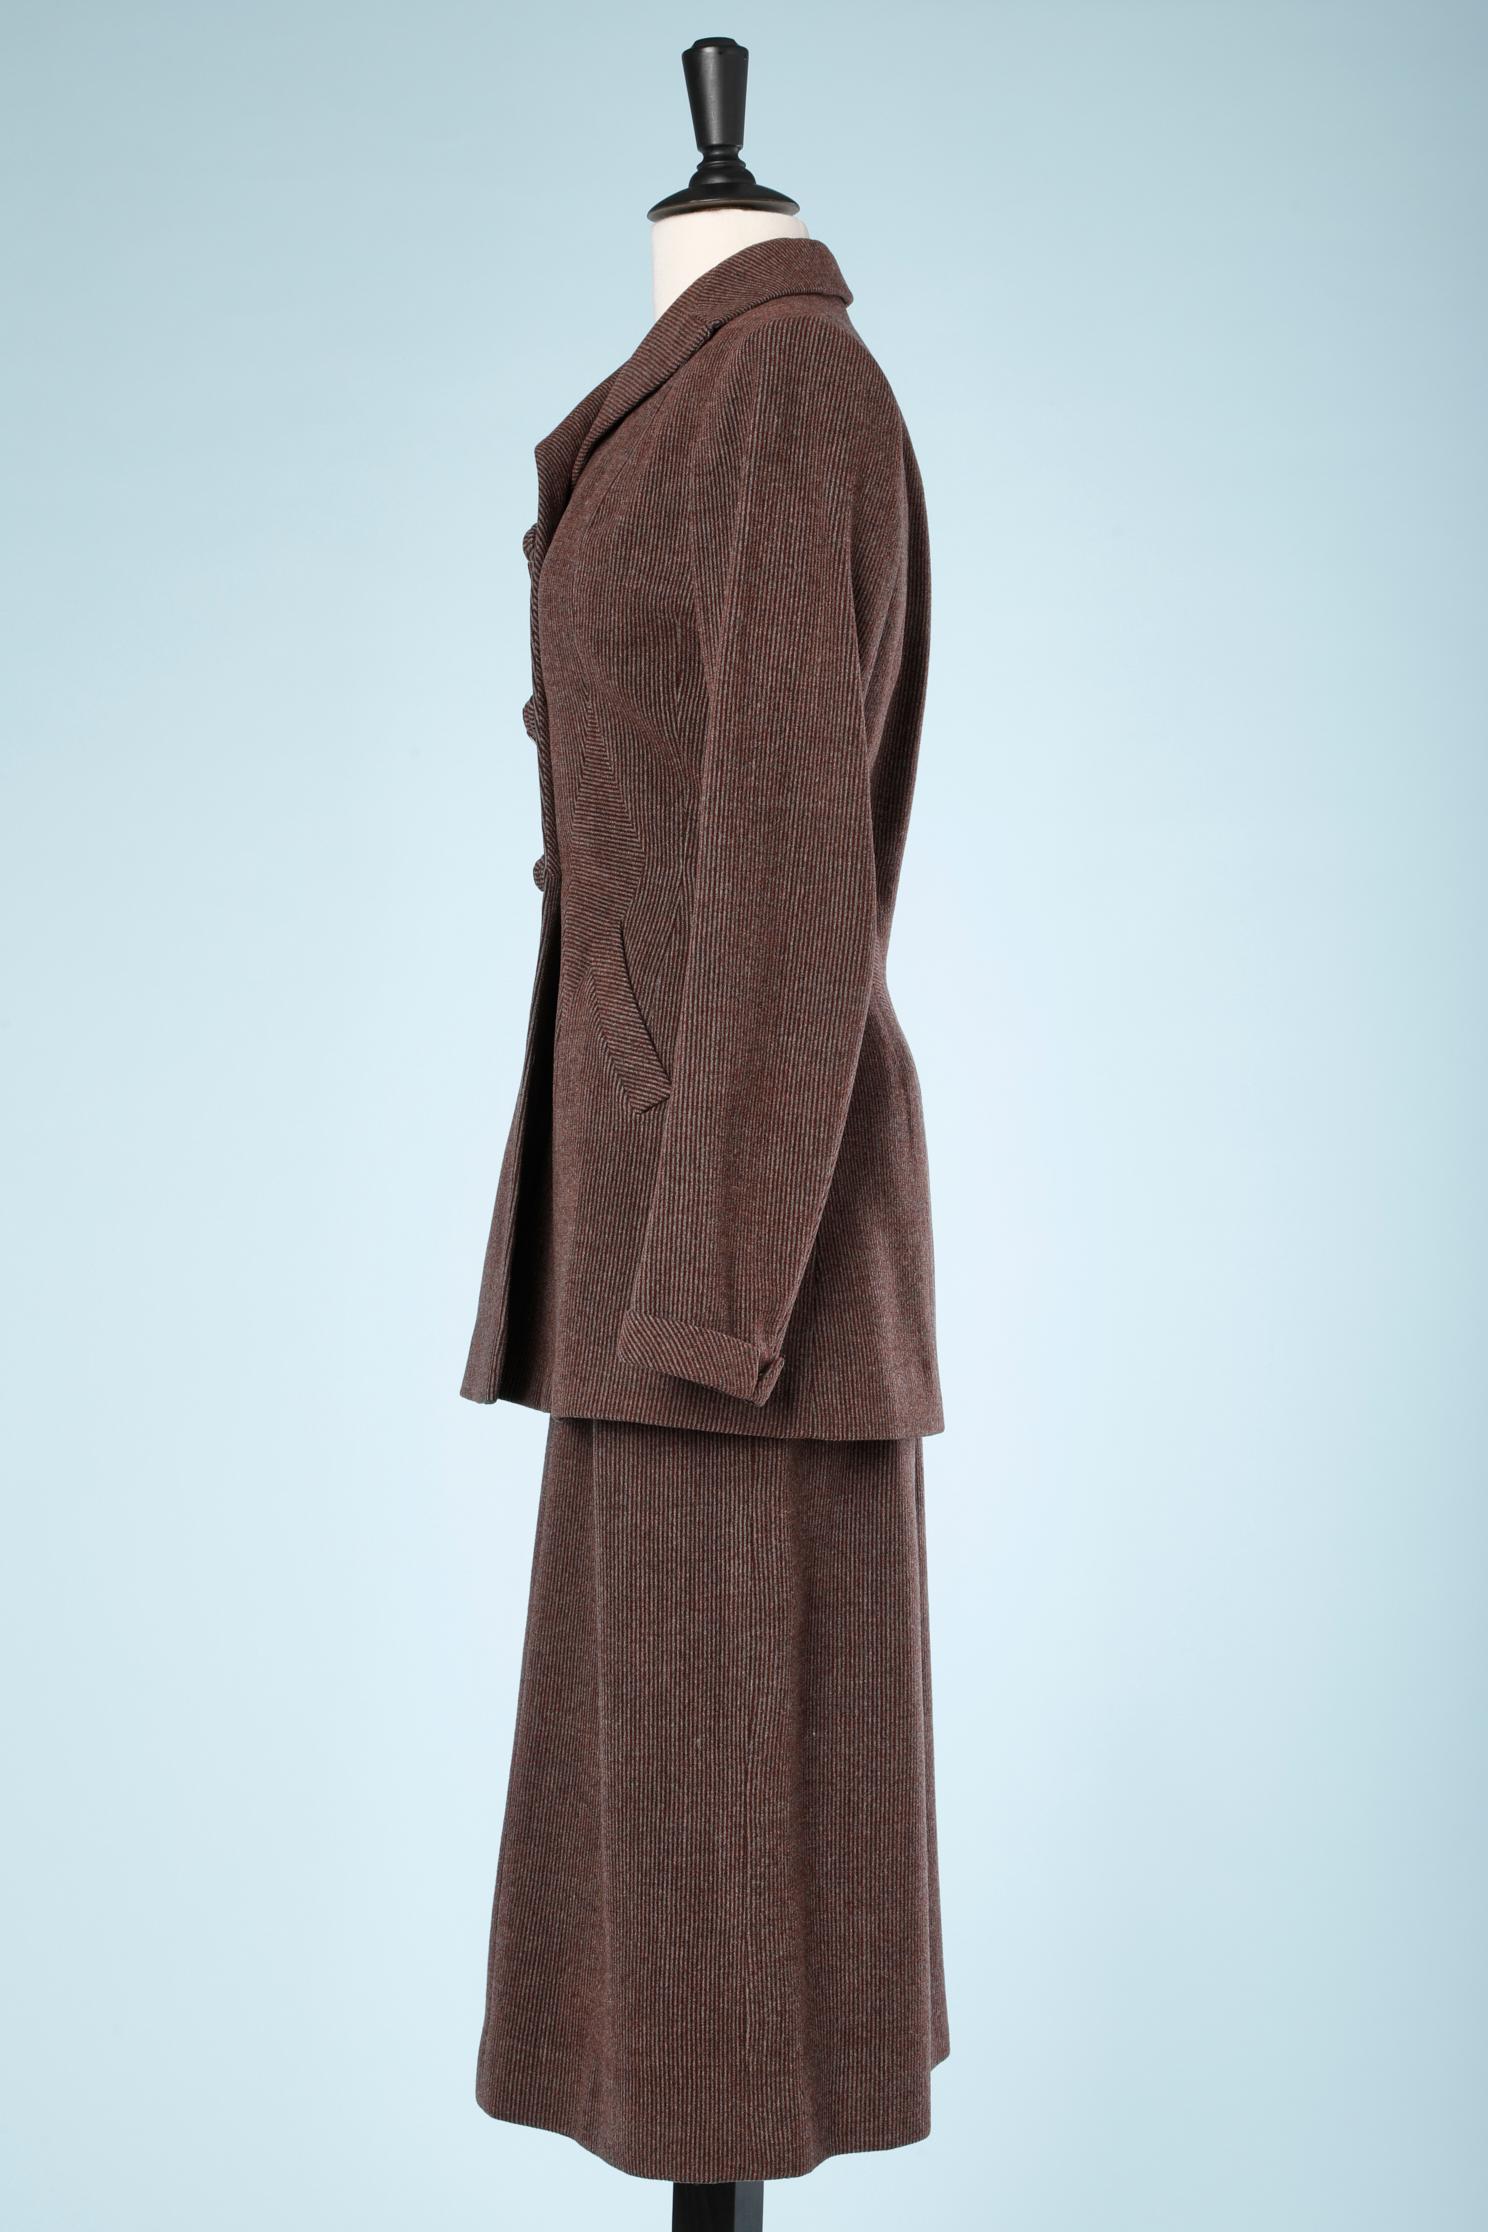 Maggy Rouff numbered Skirt-suit Circa 1940  In Excellent Condition For Sale In Saint-Ouen-Sur-Seine, FR